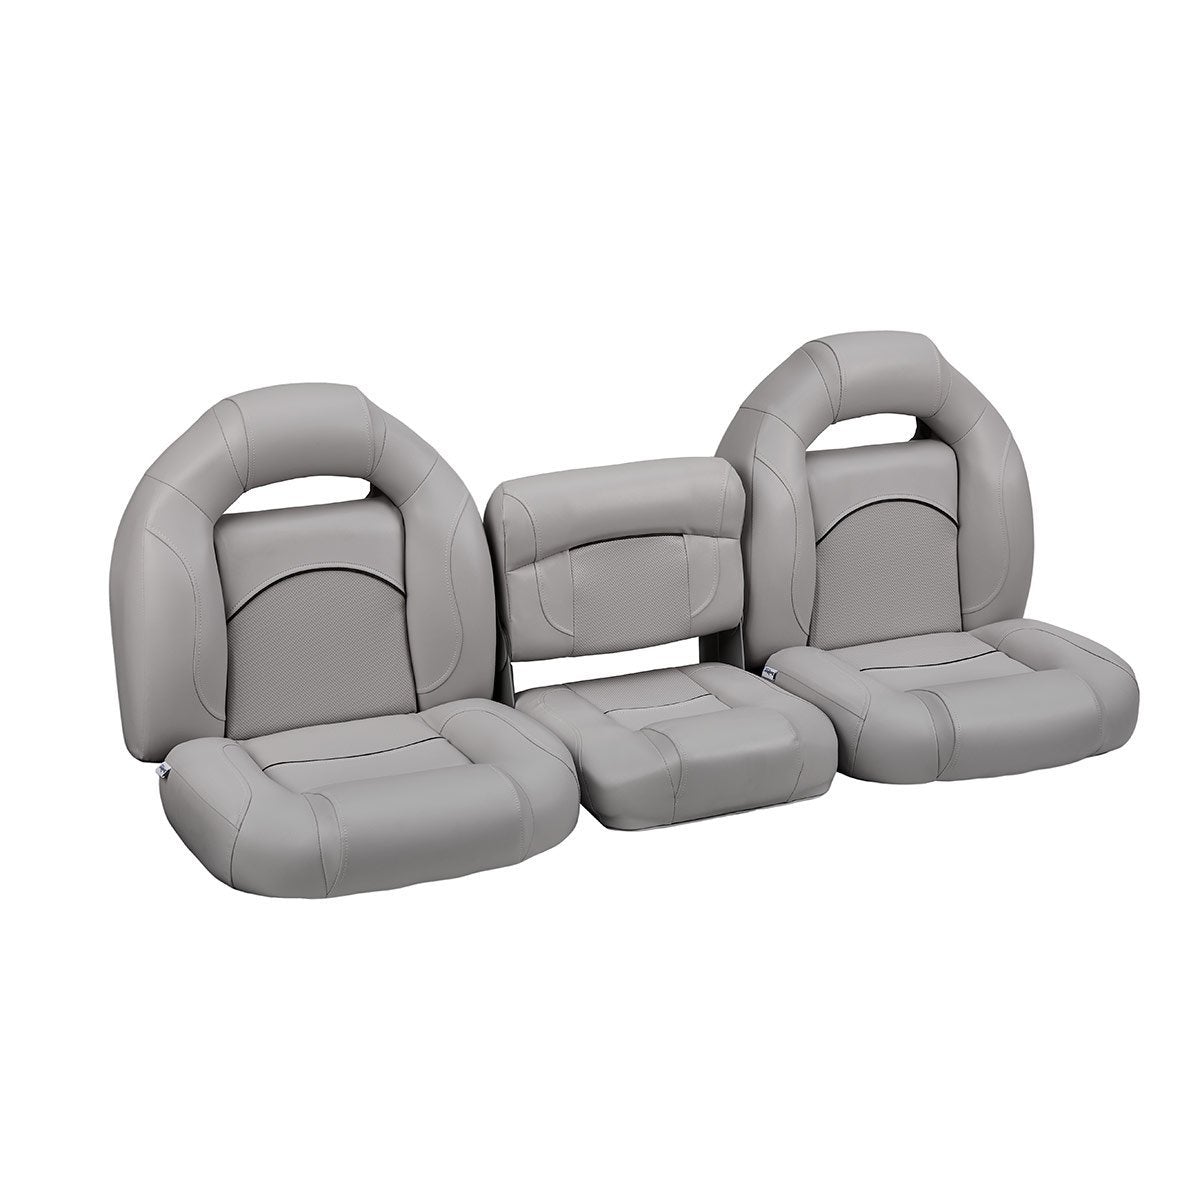 Replacement Boat Seats for Lowe Boats